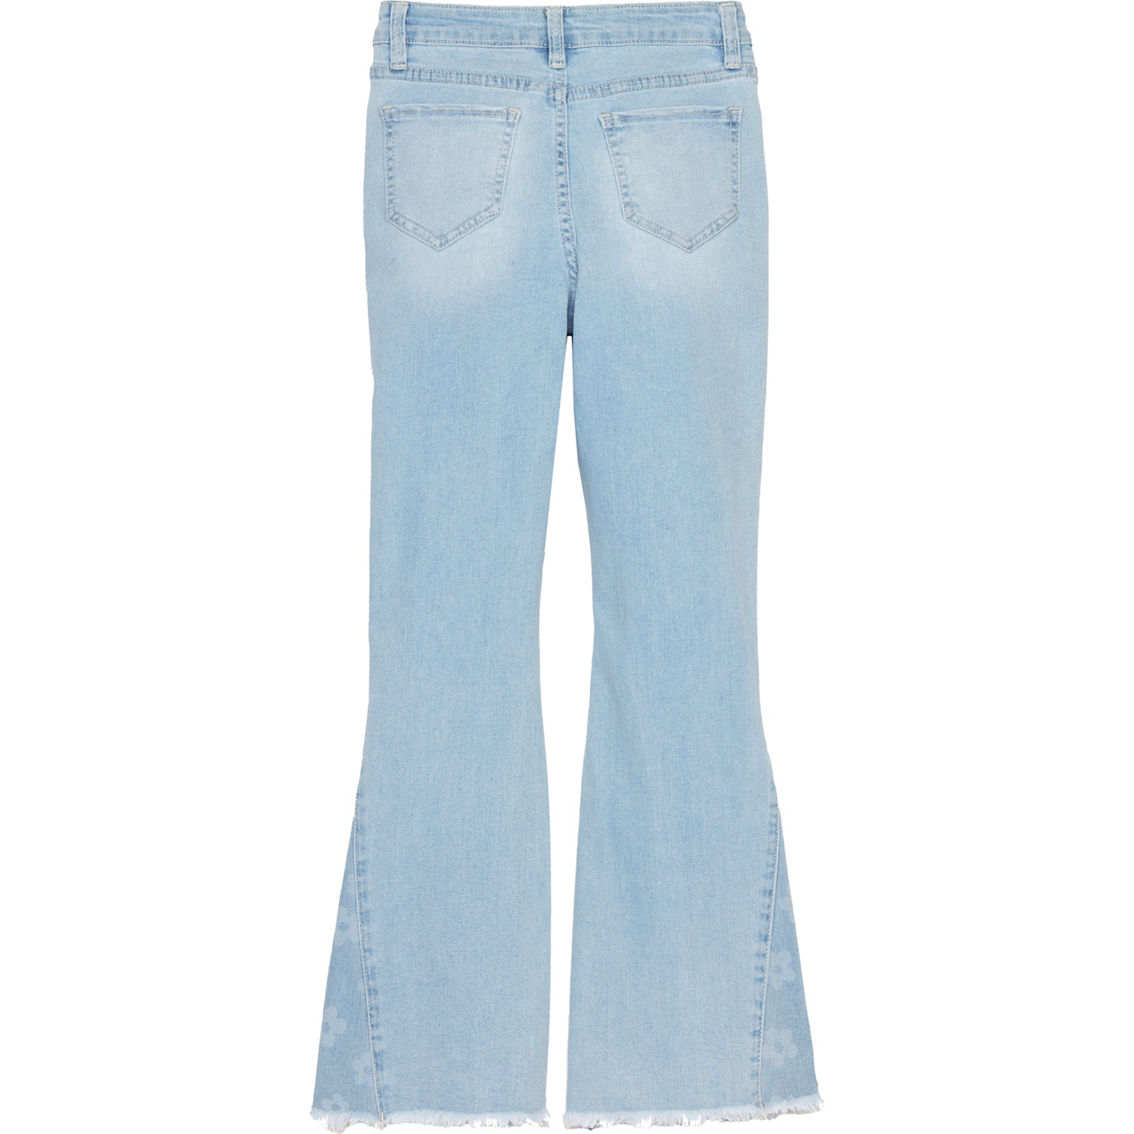 YMI Jeans Girls Frayed Hem Wide Leg Jeans with Floral Print Inset - Image 2 of 2